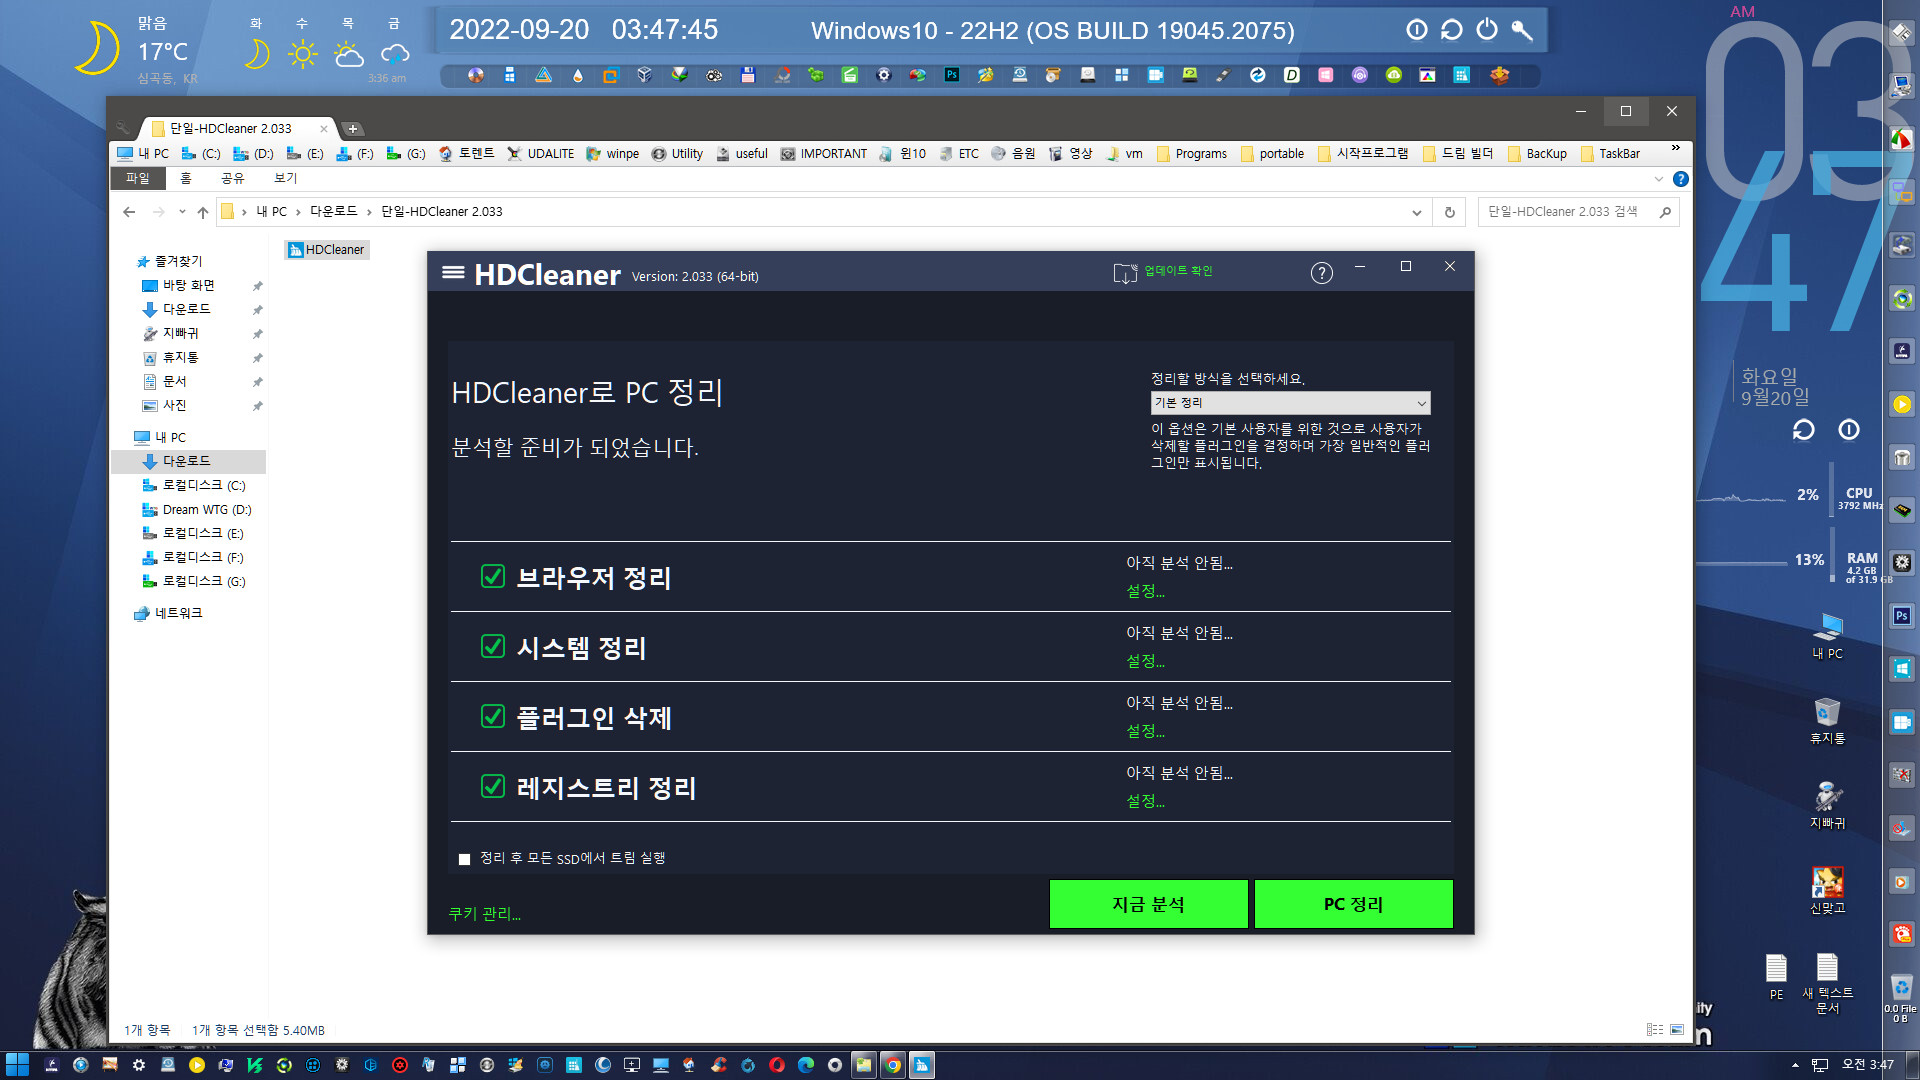 HDCleaner 2.060 instaling